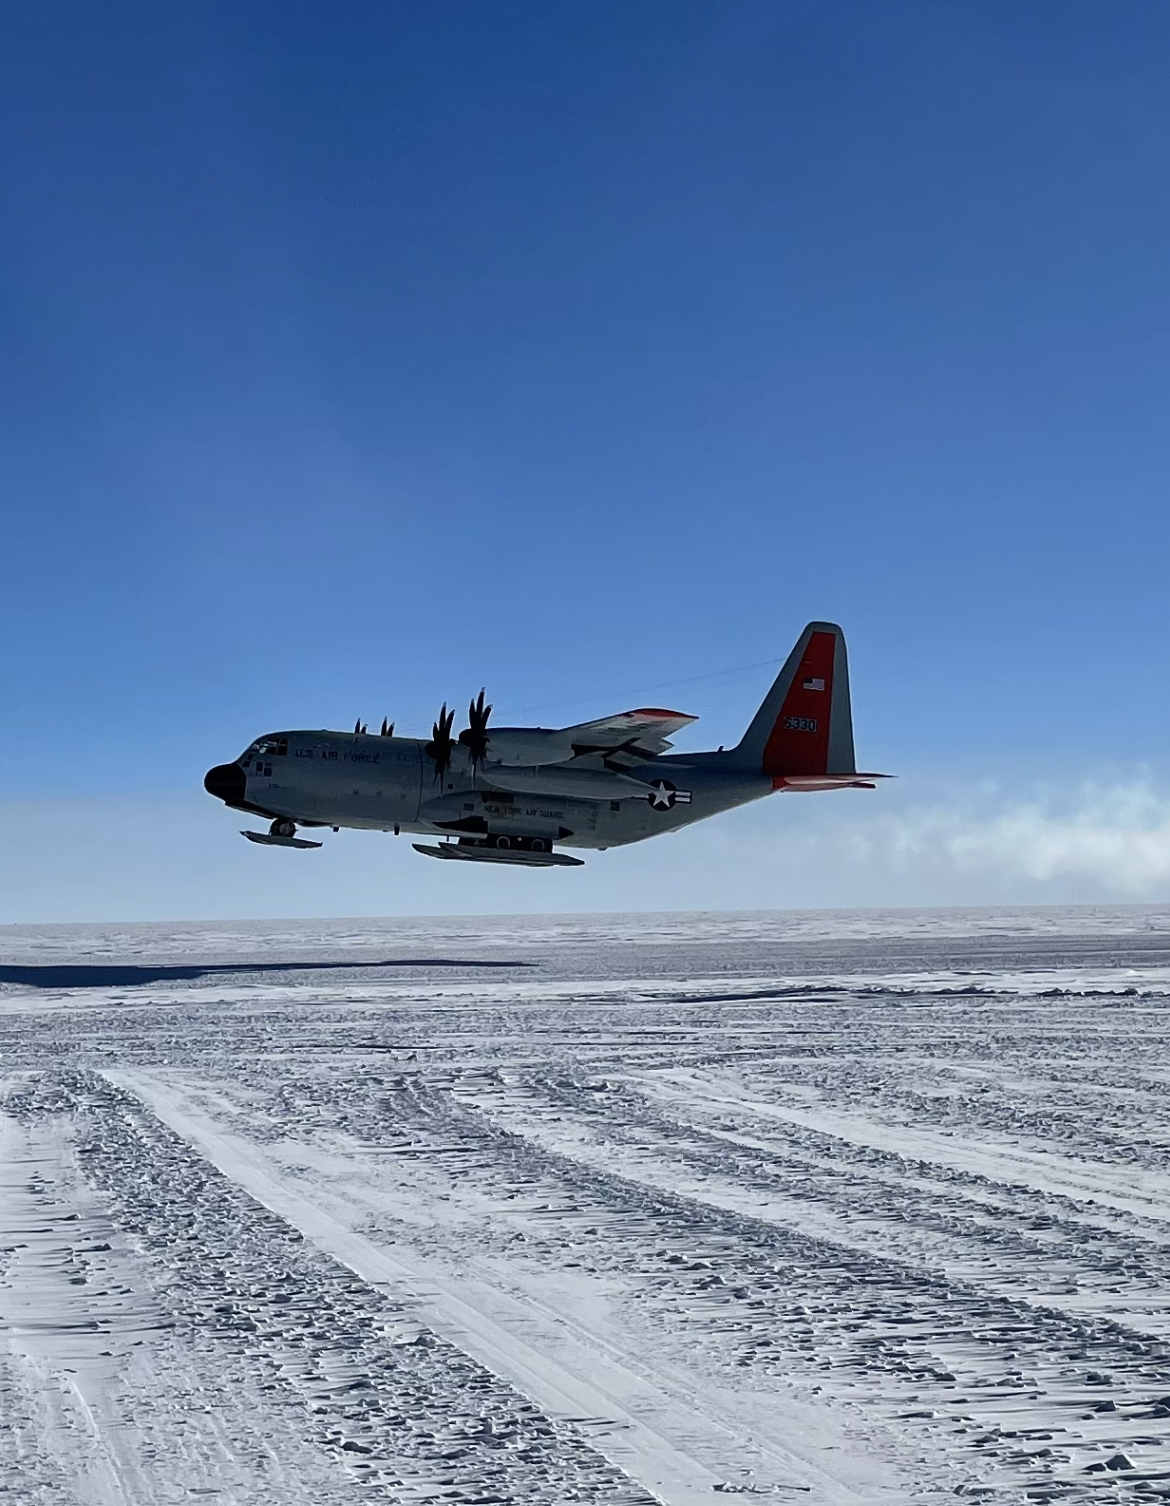 Airmen From 3 States Repair LC-130 Stranded at South Pole > National Guard  > Article View